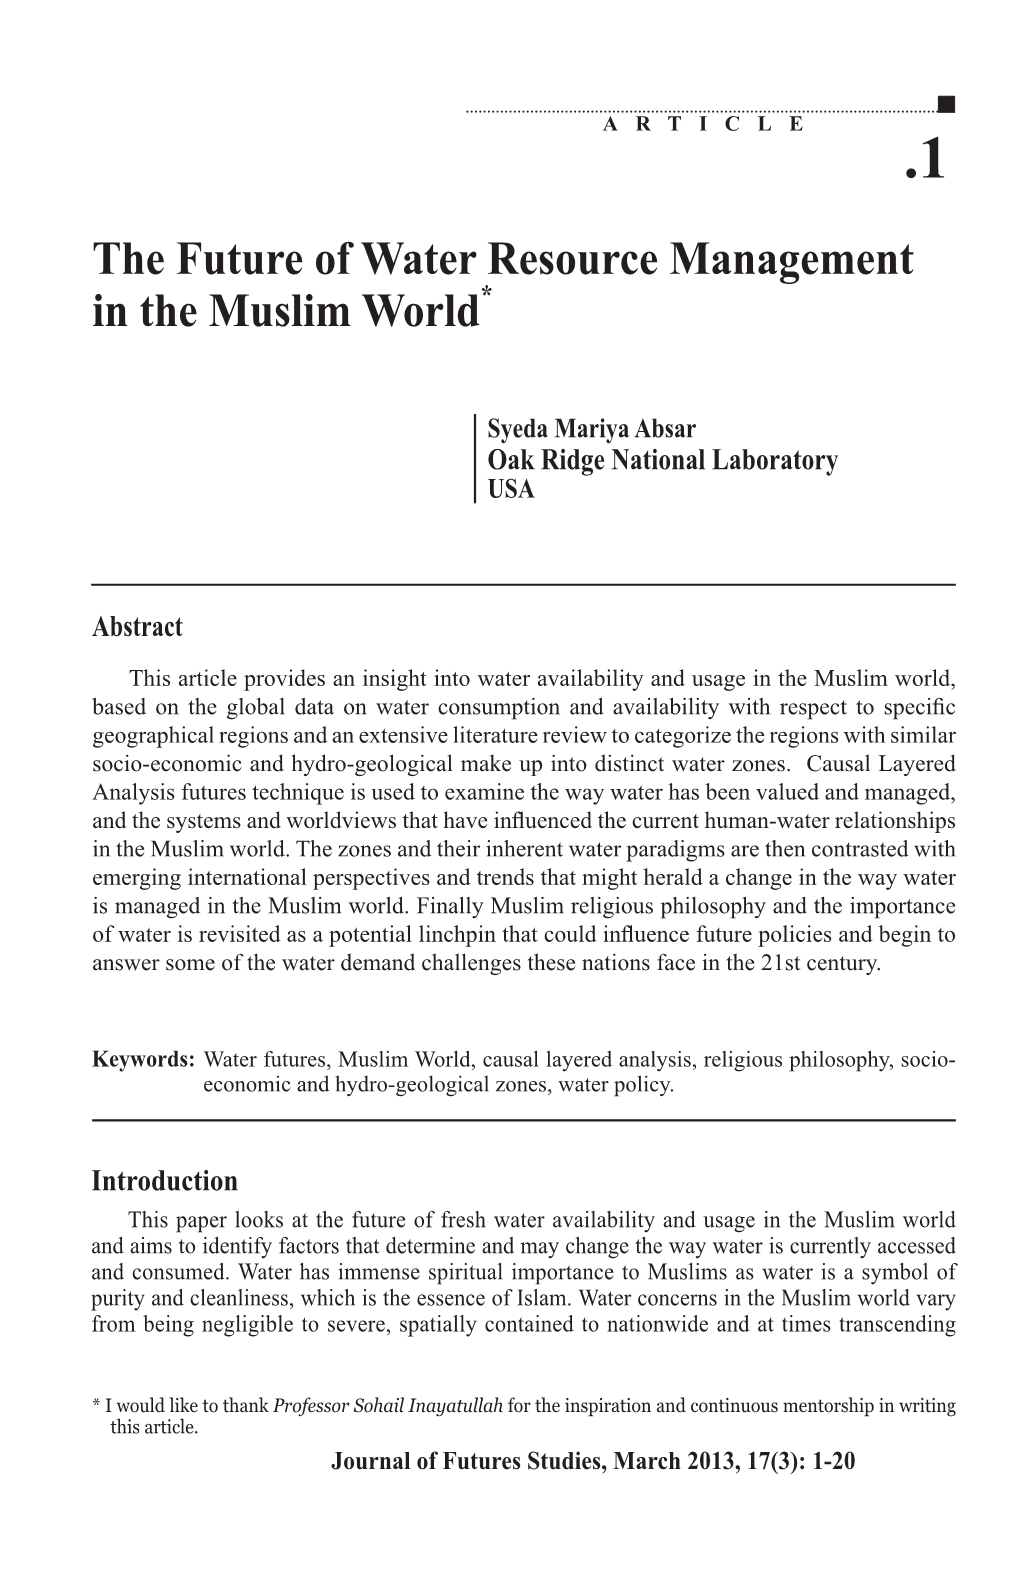 The Future of Water Resource Management in the Muslim World*